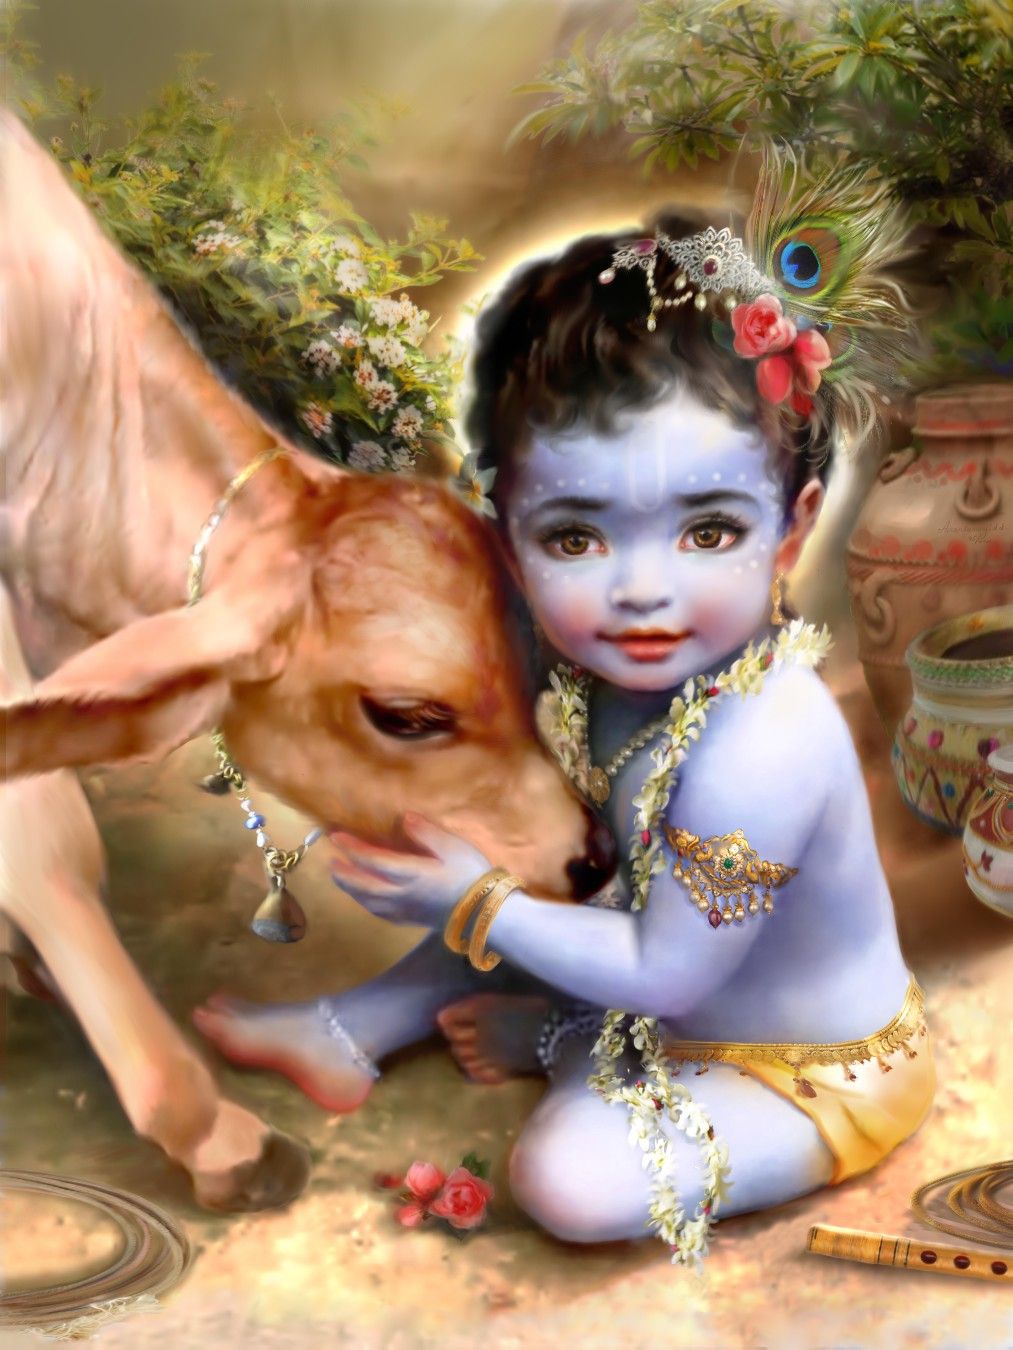 Govinda who pleases cows, senses and Mother Earth HD Wallpaper